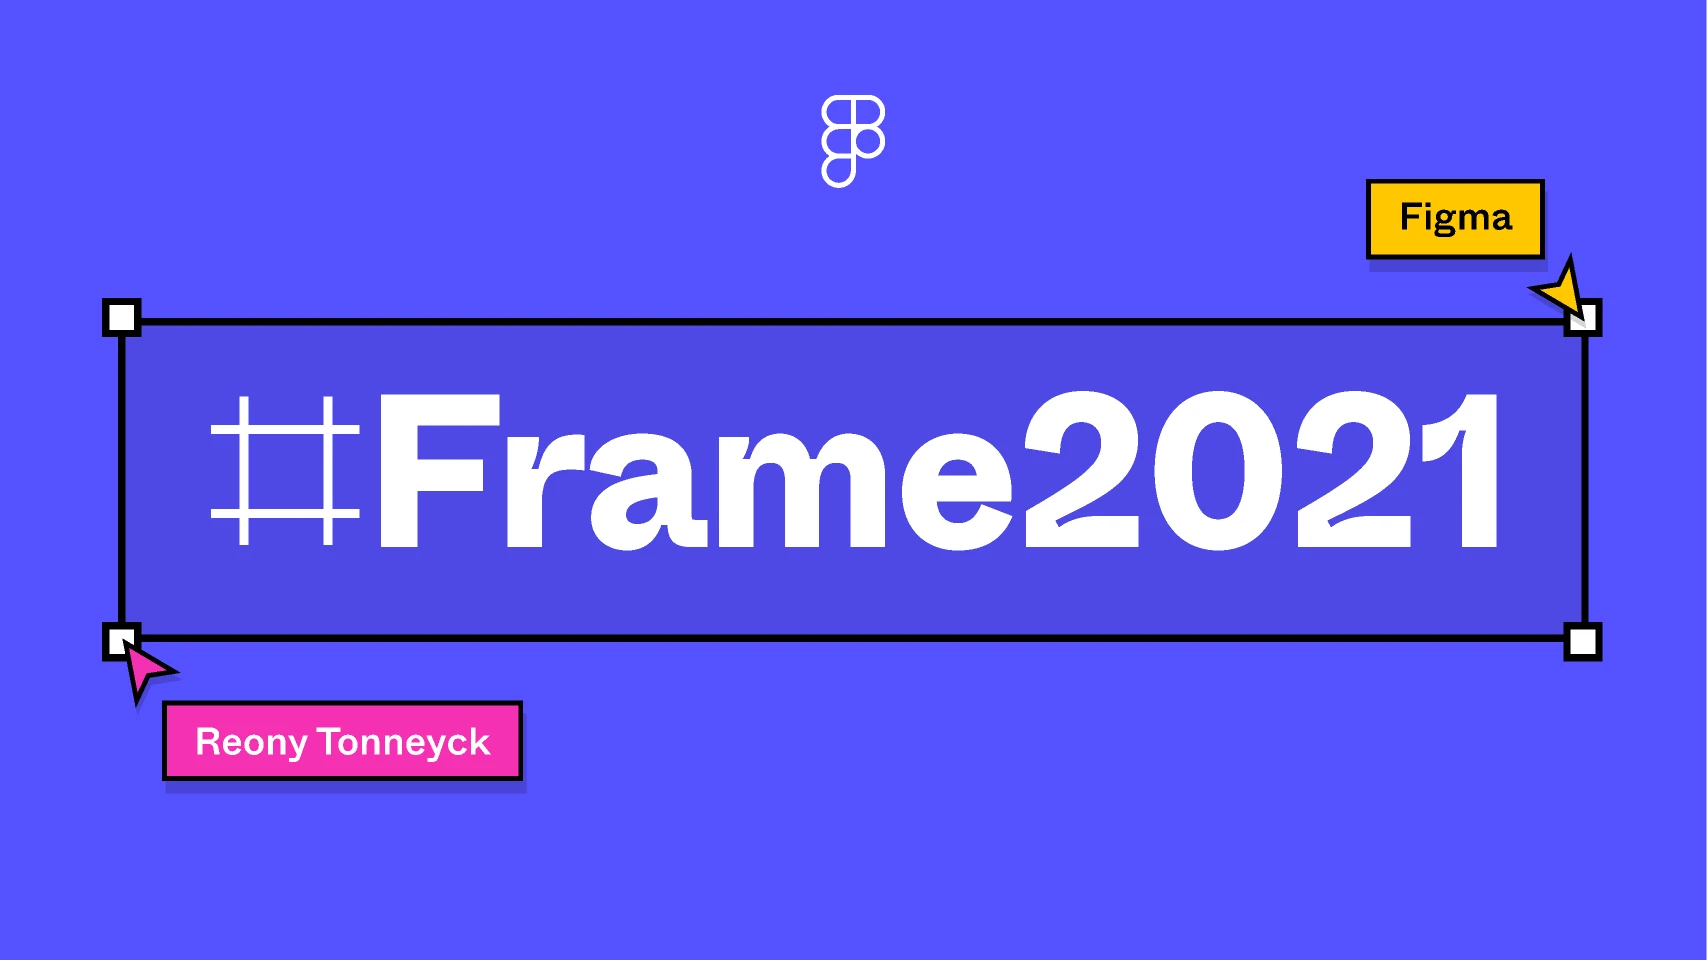 My Frame2021 - Reony Tonneyck for Figma and Adobe XD